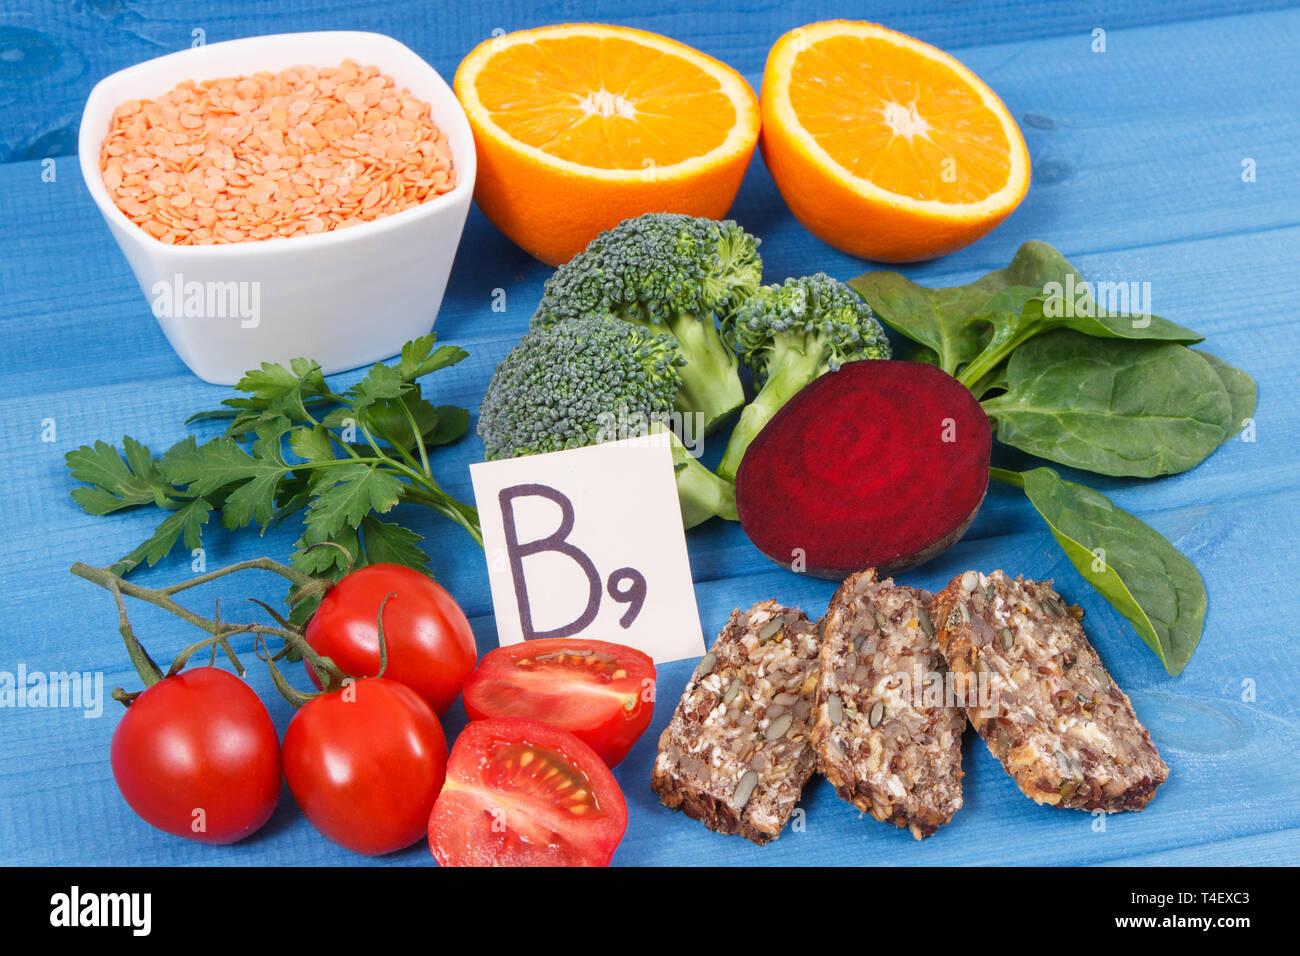 Nutritious different ingredients containing vitamin B9, dietary fiber, natural minerals and folic acid, concept of healthy nutrition Stock Photo